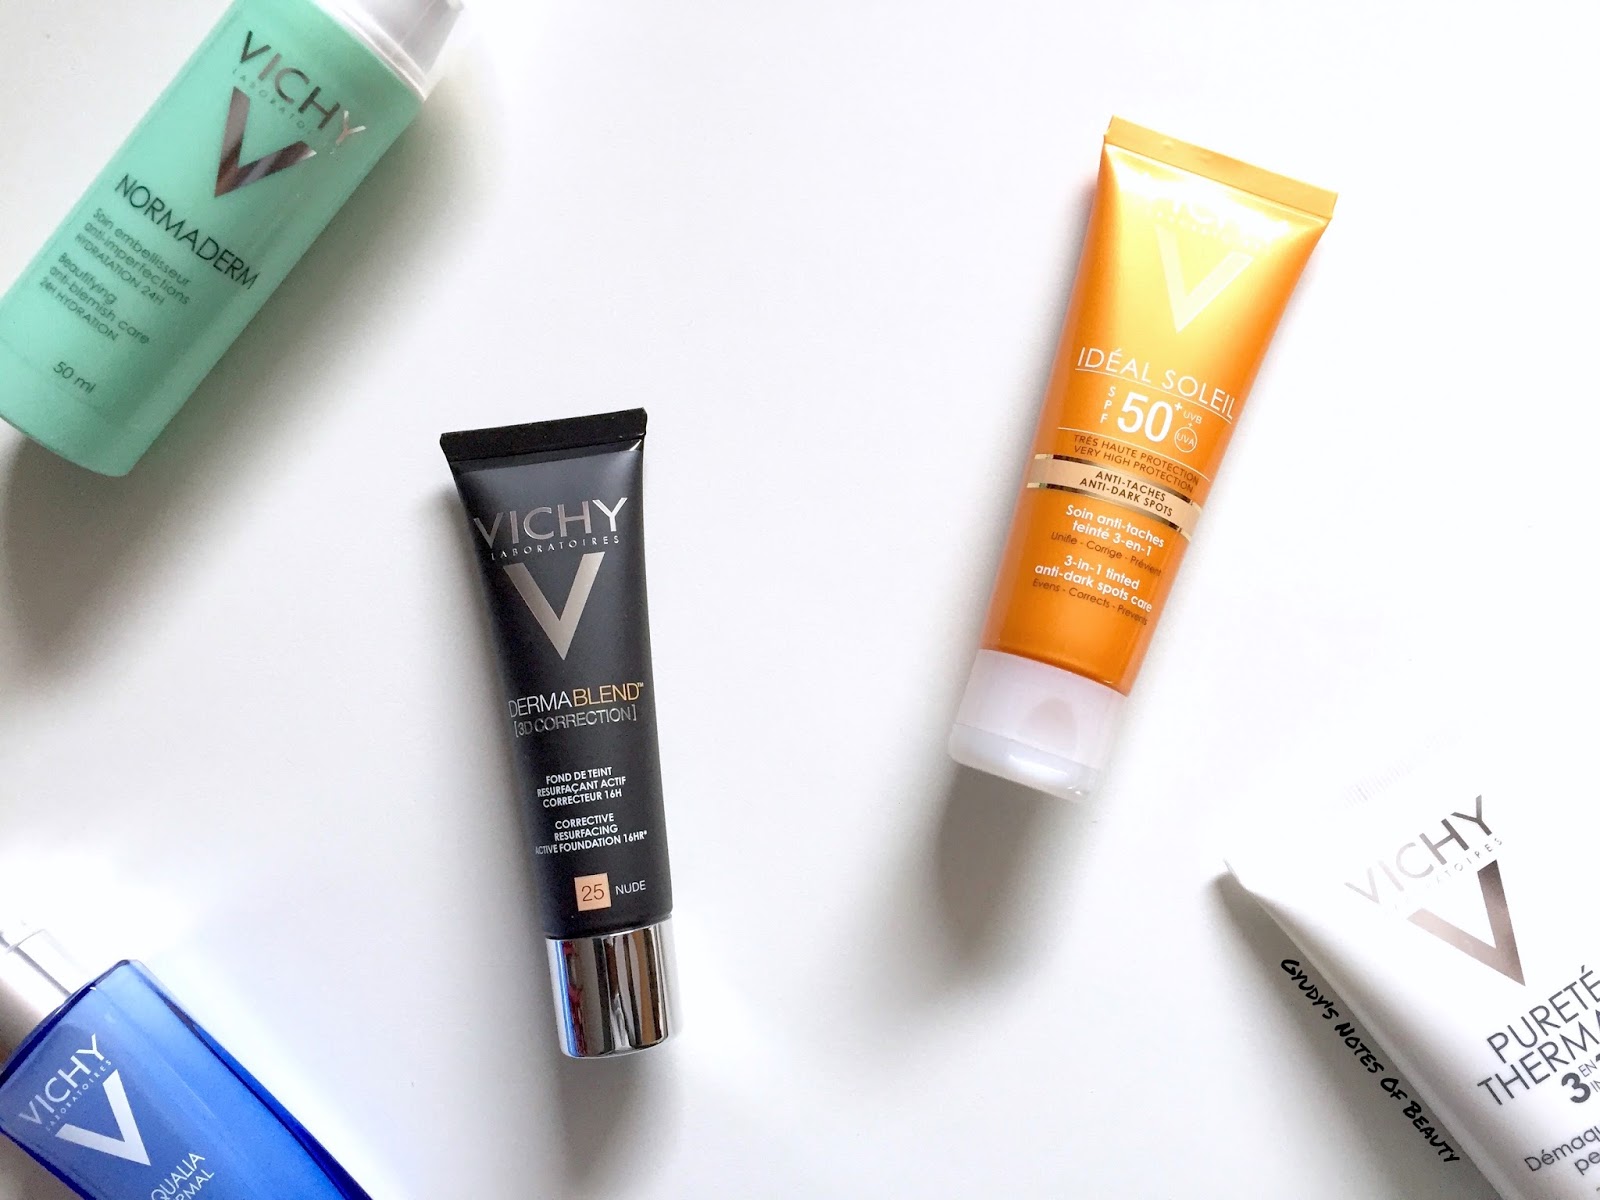 Vertrouwelijk noot Uittreksel Gyudy's Notes Of Beauty: Vichy Dermablend [3D CORRECTION] & Vichy Ideal  Soleil SPF 50 3-IN-1 Tinted Anti-Dark Spots Care | New At The Pharmacy